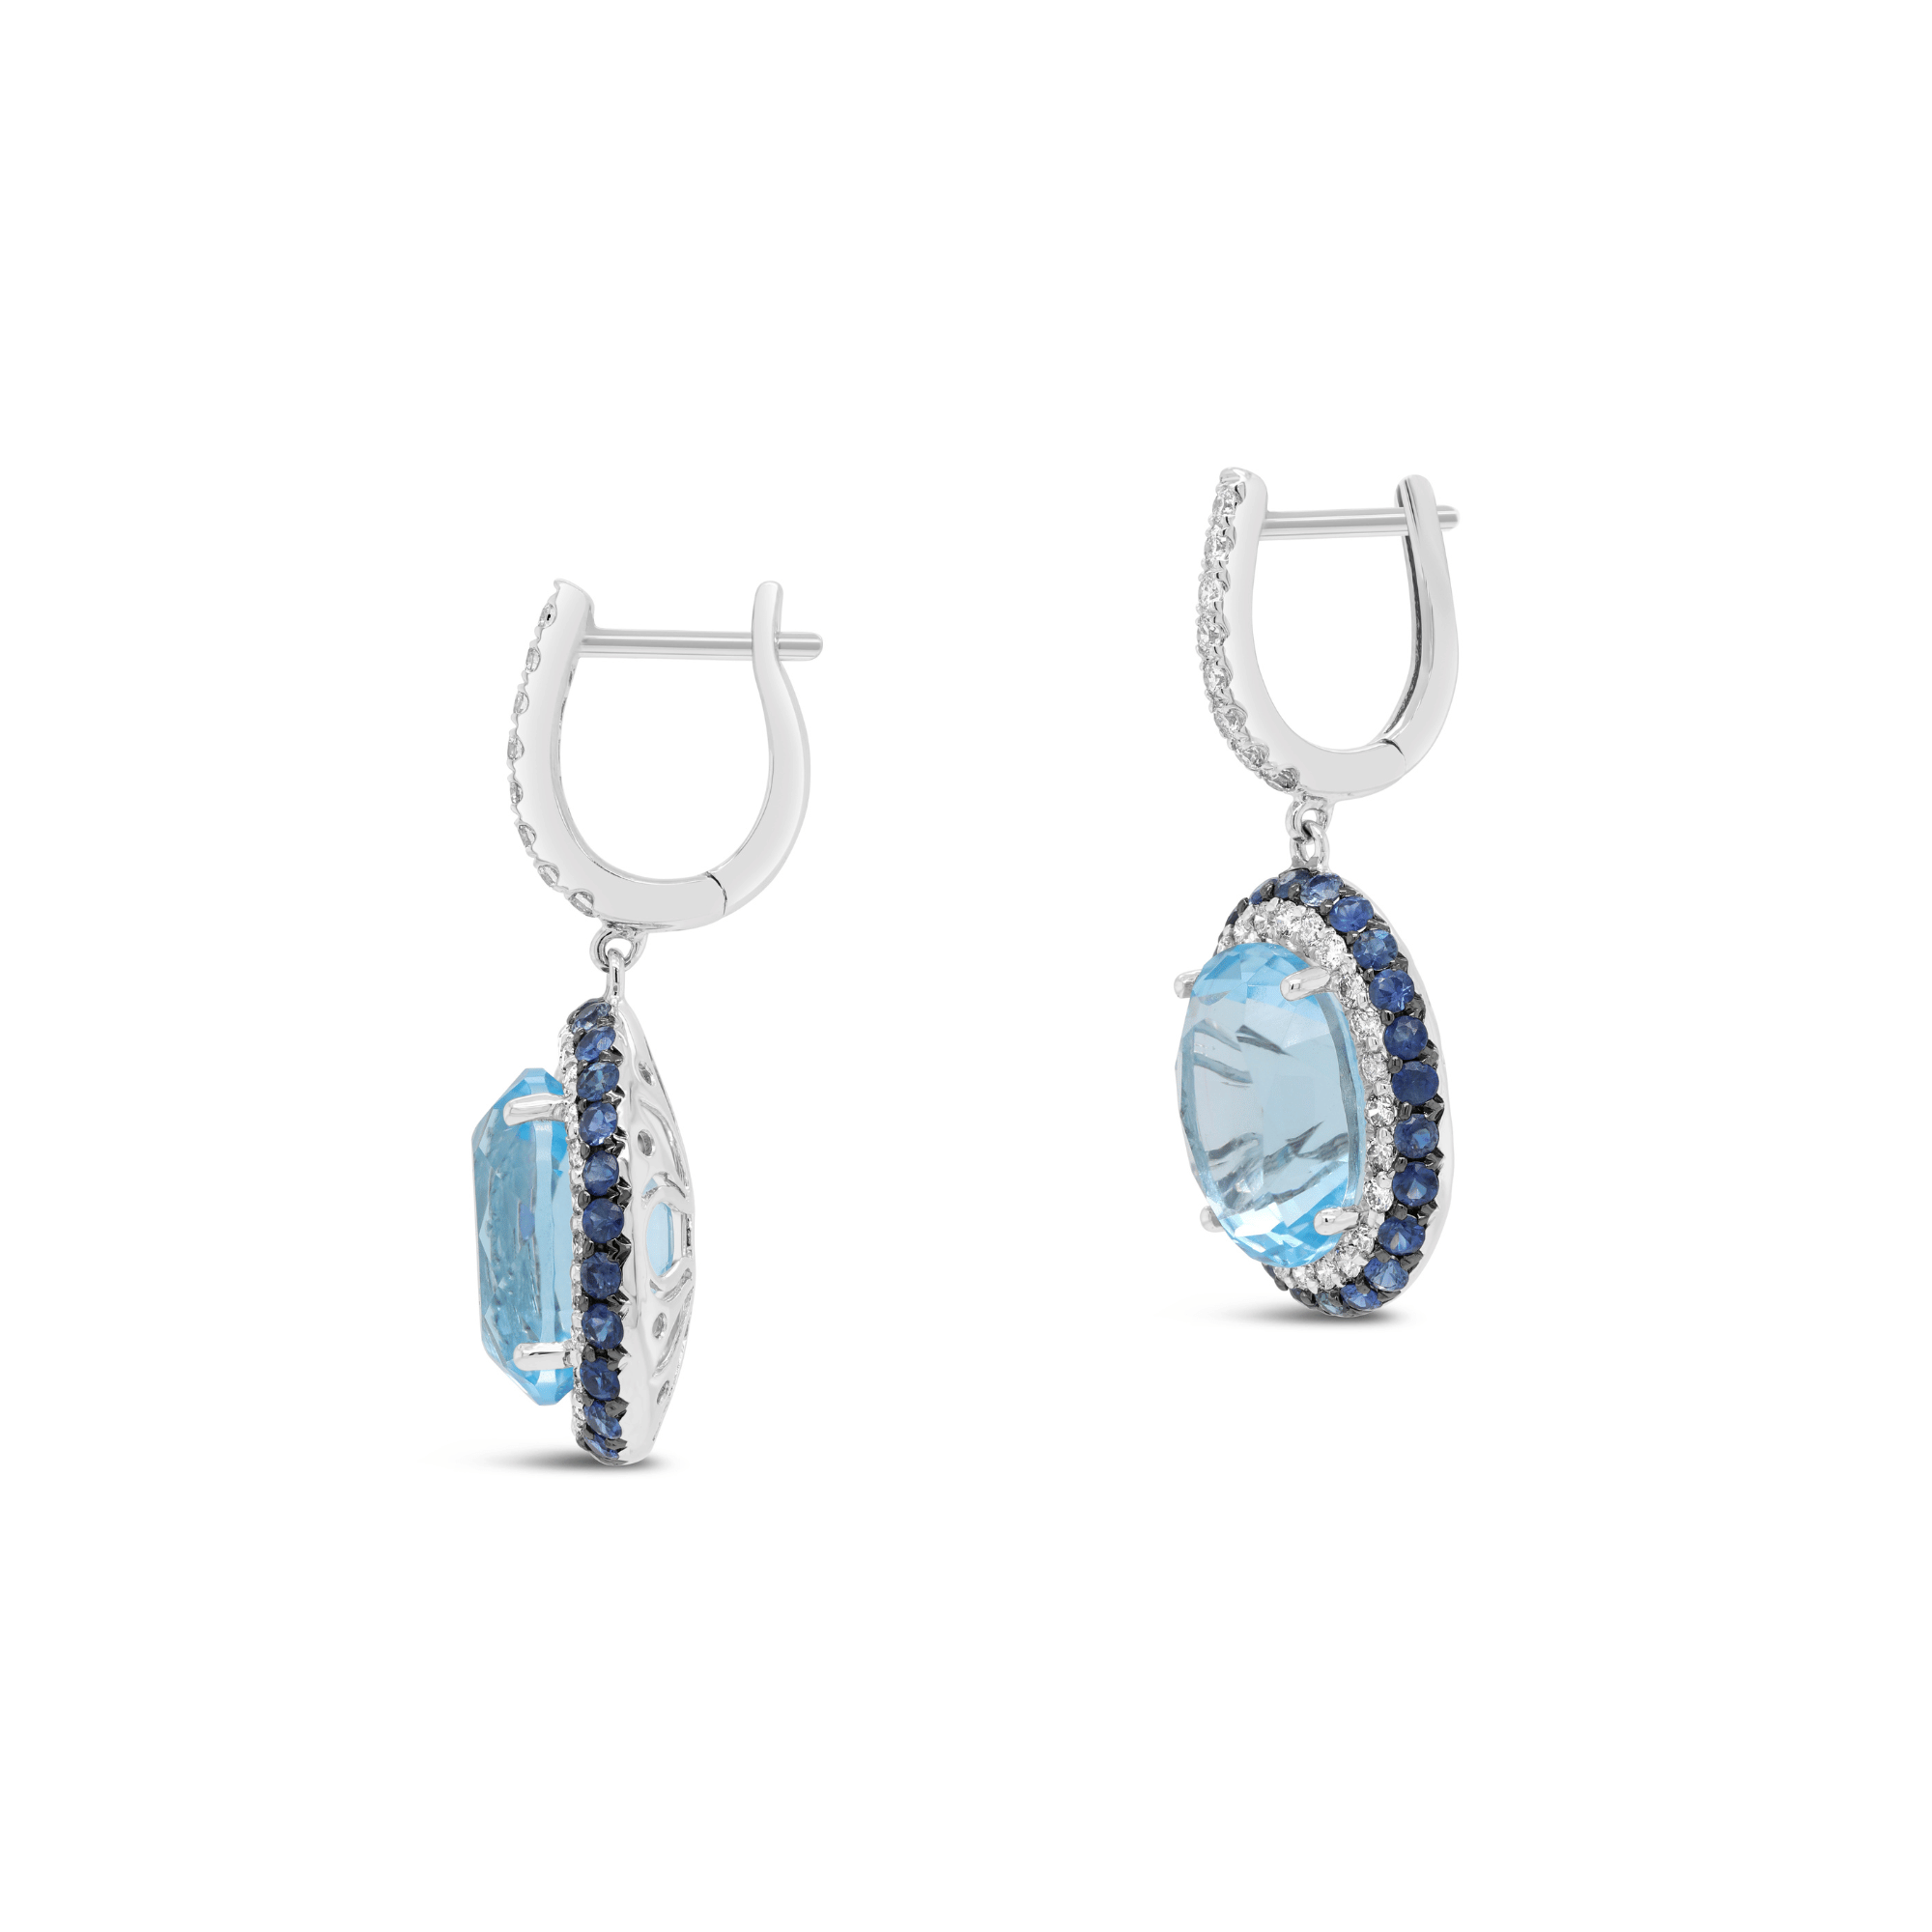 Blue topaz earrings with blue sapphire and diamond halo